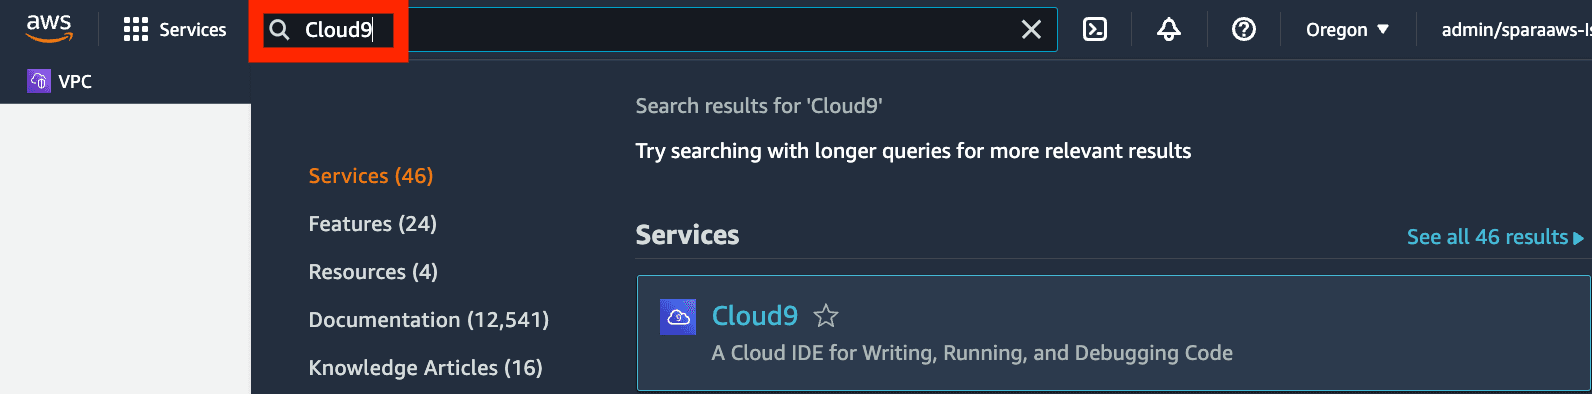 Open Cloud9 service in the AWS console